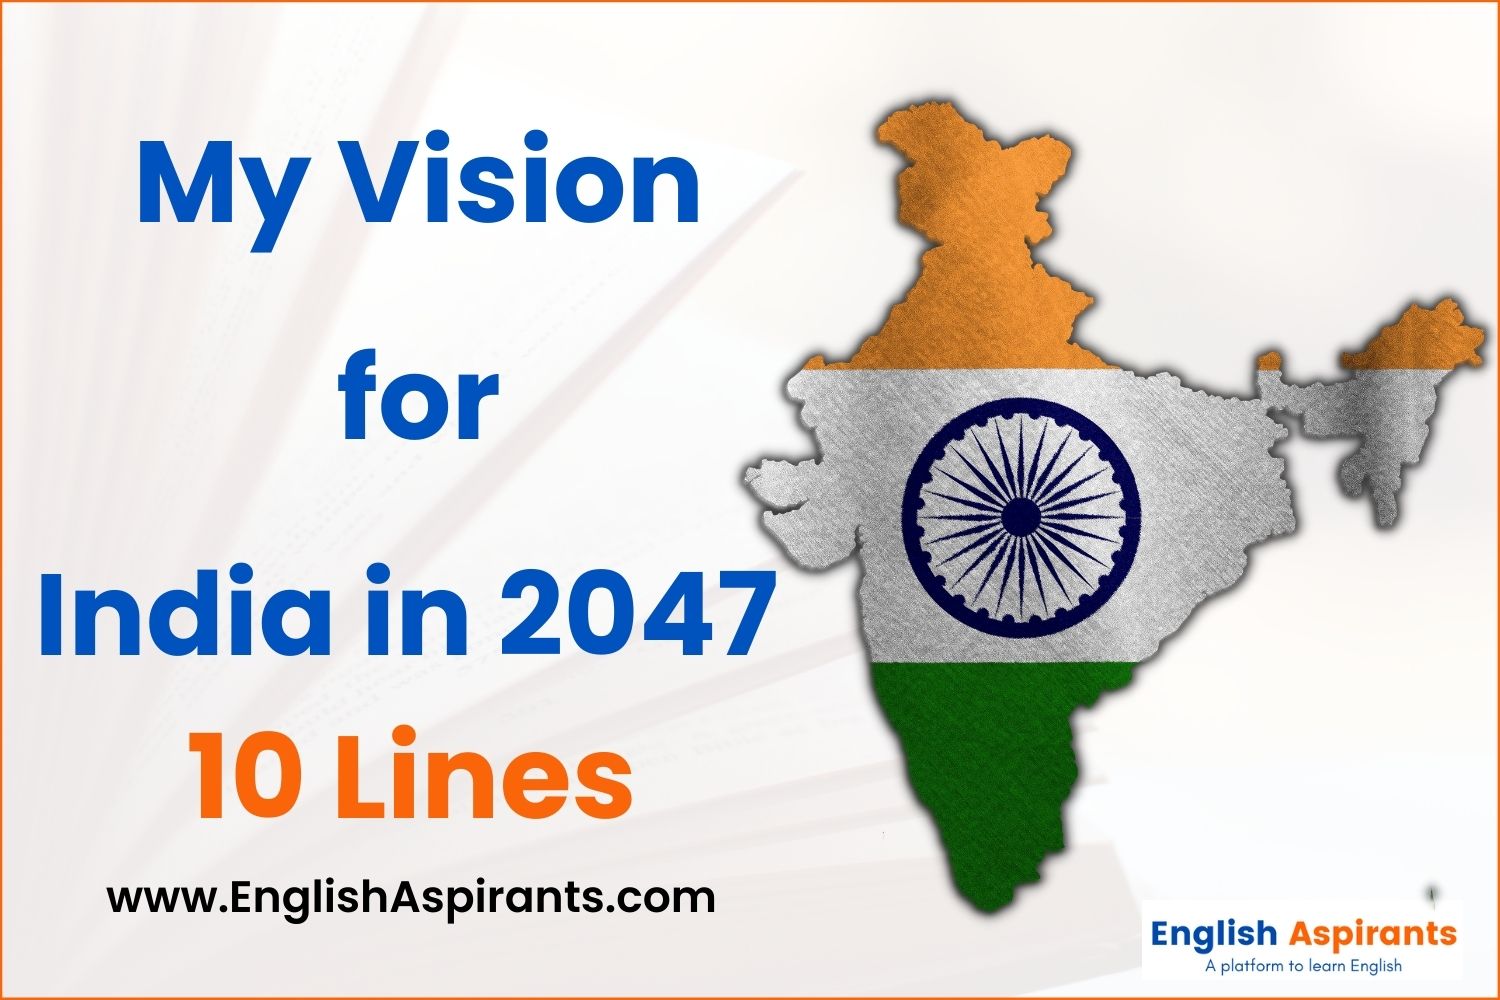 My Vision for India in 2047 10 lines